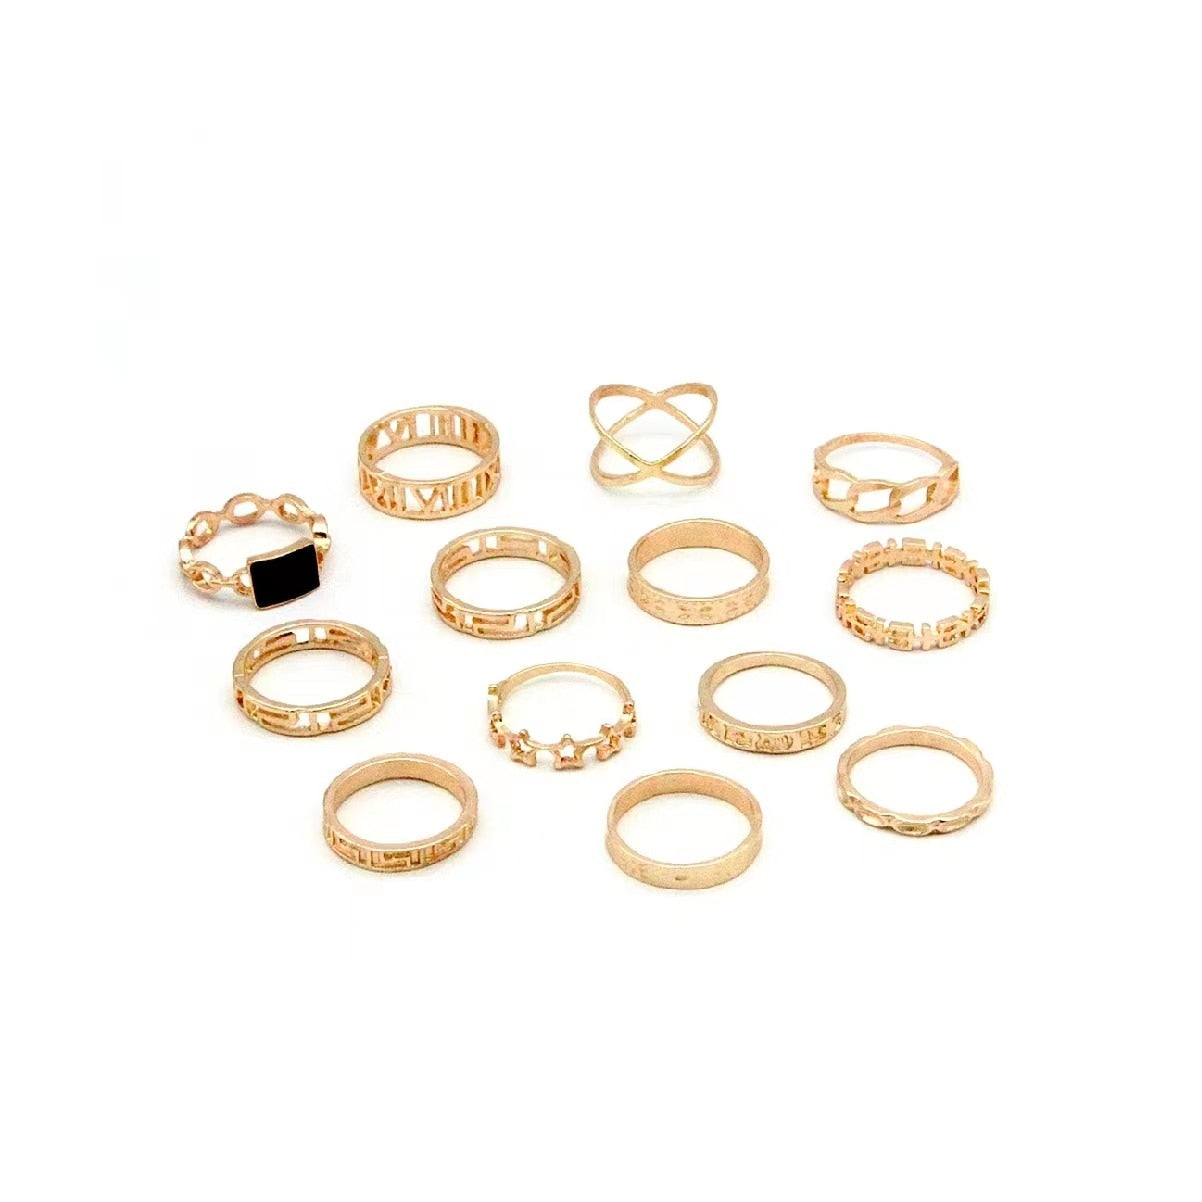 Queen's Rings: Beautiful 100-Piece Women's Premium Ring Collection